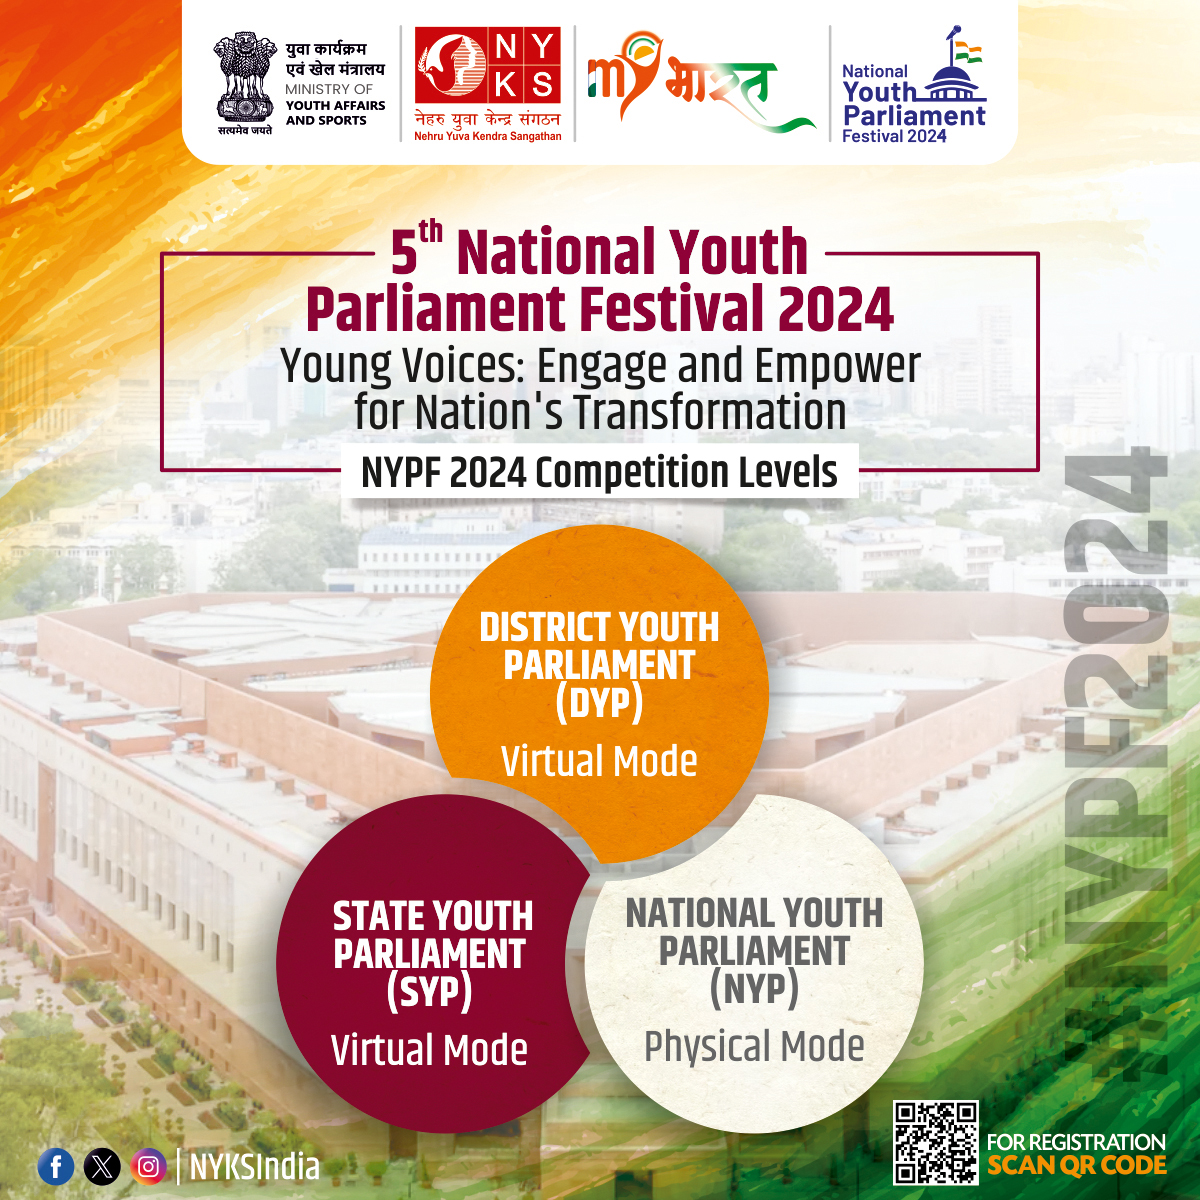 The Youth Parliament Festival 2024 will be conducted at three levels: District ➡️ State ➡️National. Follow us for the latest updates and register today at mybharat.gov.in or Scan QR Code #NYPF2024 #YouthParliamentFestival #Youth #NYKS #MYBharat